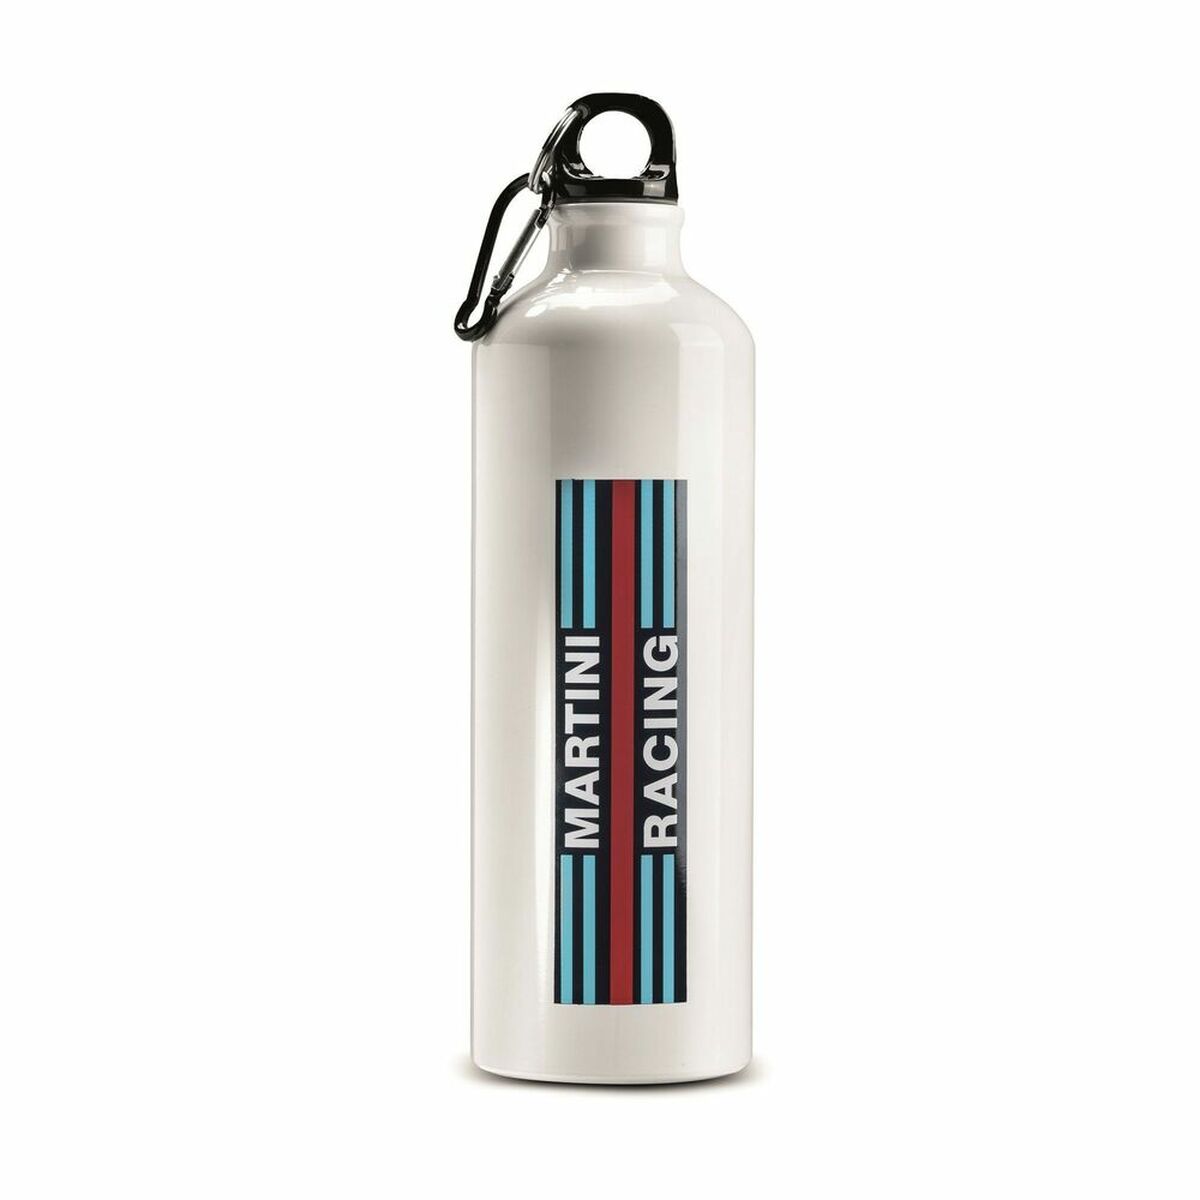 Bouteille Sparco Martini Racing Blanche